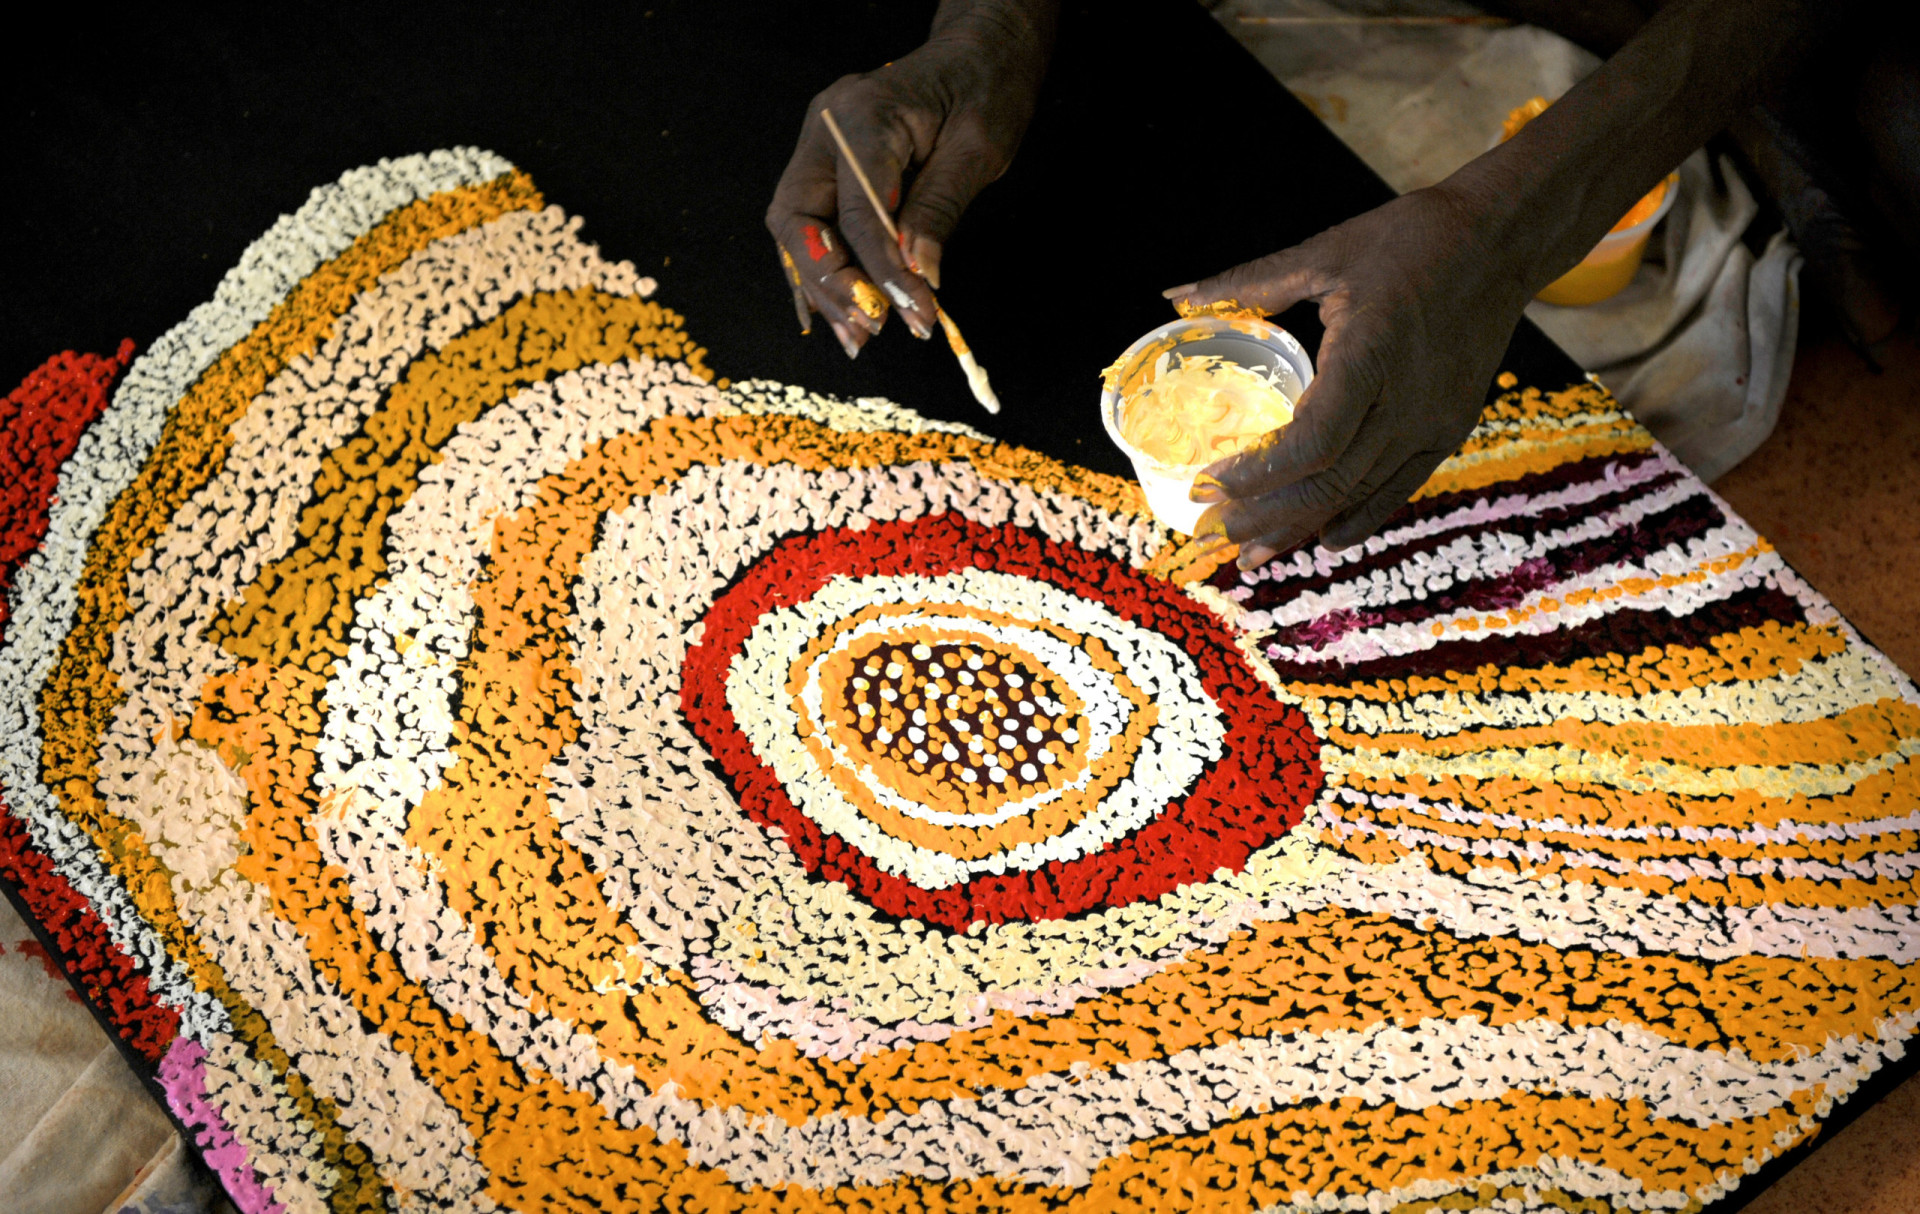 <p>Aboriginal art is characterized by dot paintings, rock carvings, and bark paintings. Artwork is not just decorative but holds spiritual and cultural significance.</p><p>You may also like:<a href="https://www.starsinsider.com/n/318193?utm_source=msn.com&utm_medium=display&utm_campaign=referral_description&utm_content=722683en-us"> The coolest and craziest cable car rides in the world</a></p>